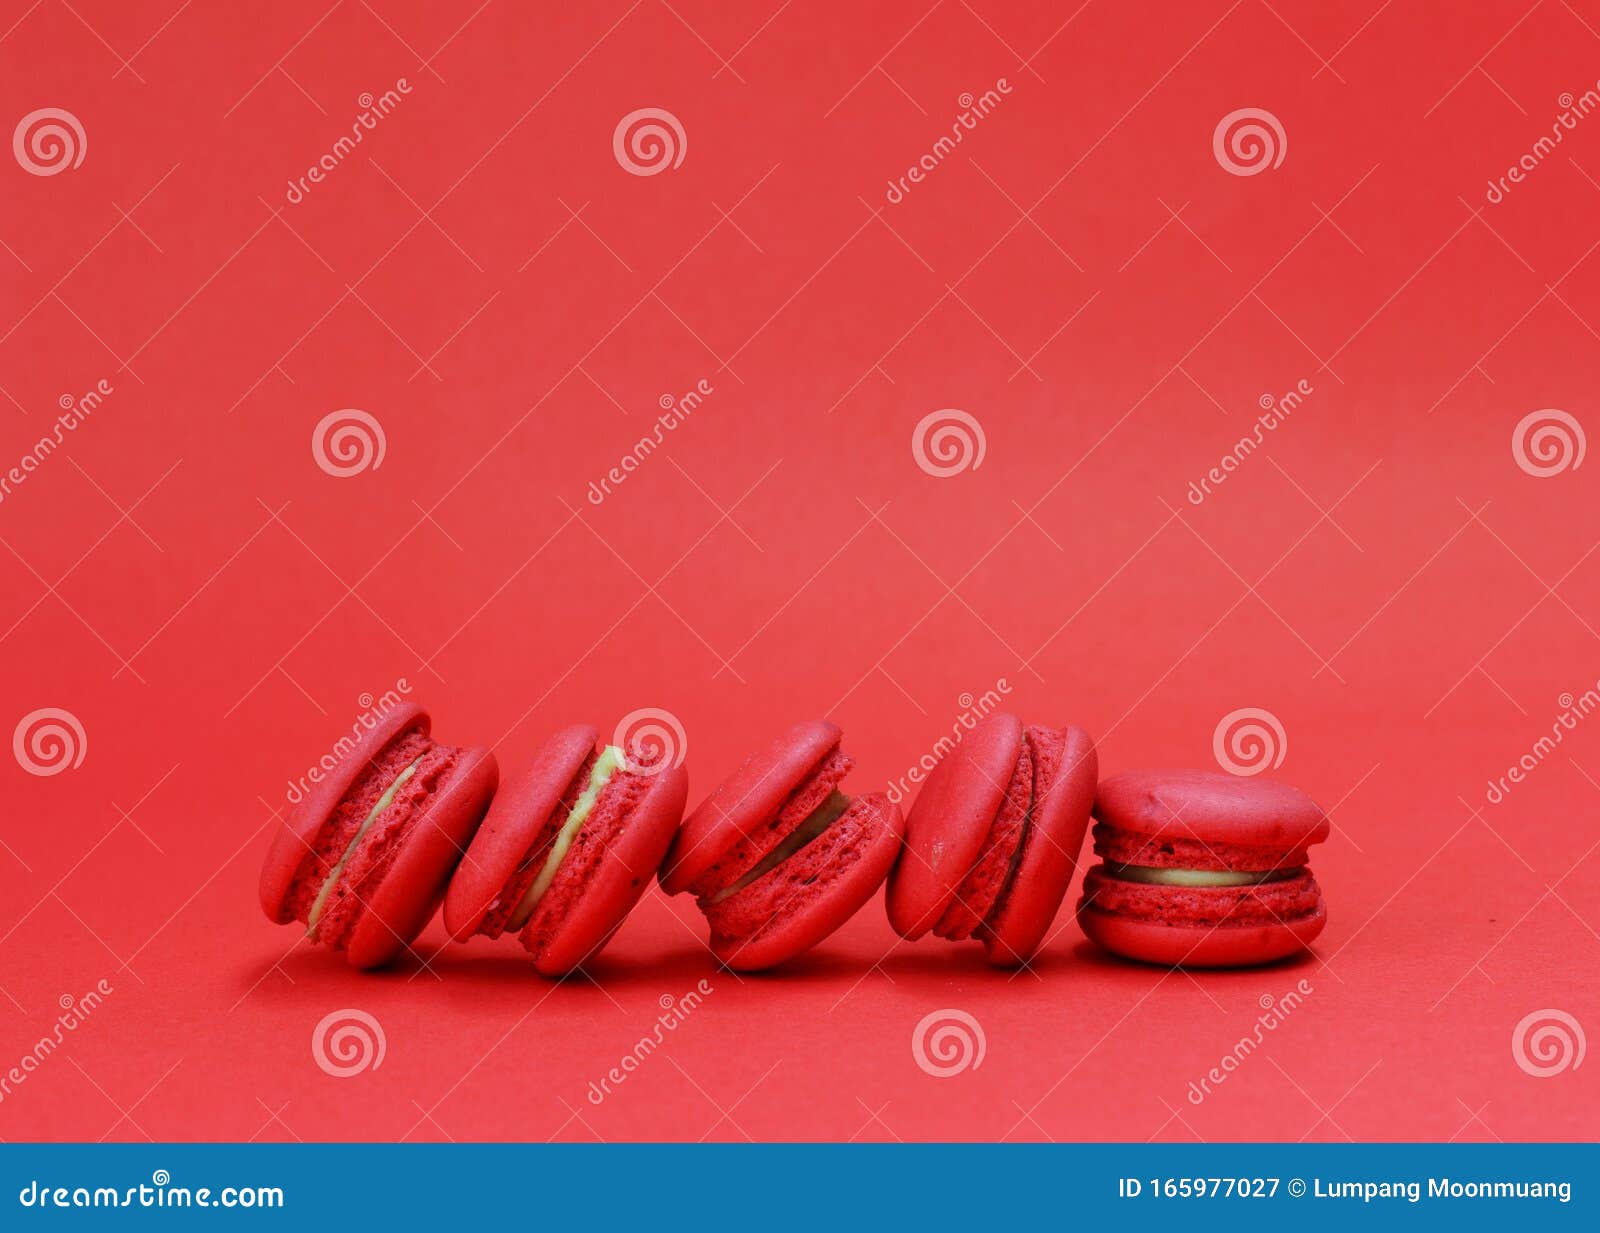 french macaroons stack on red backgrouds